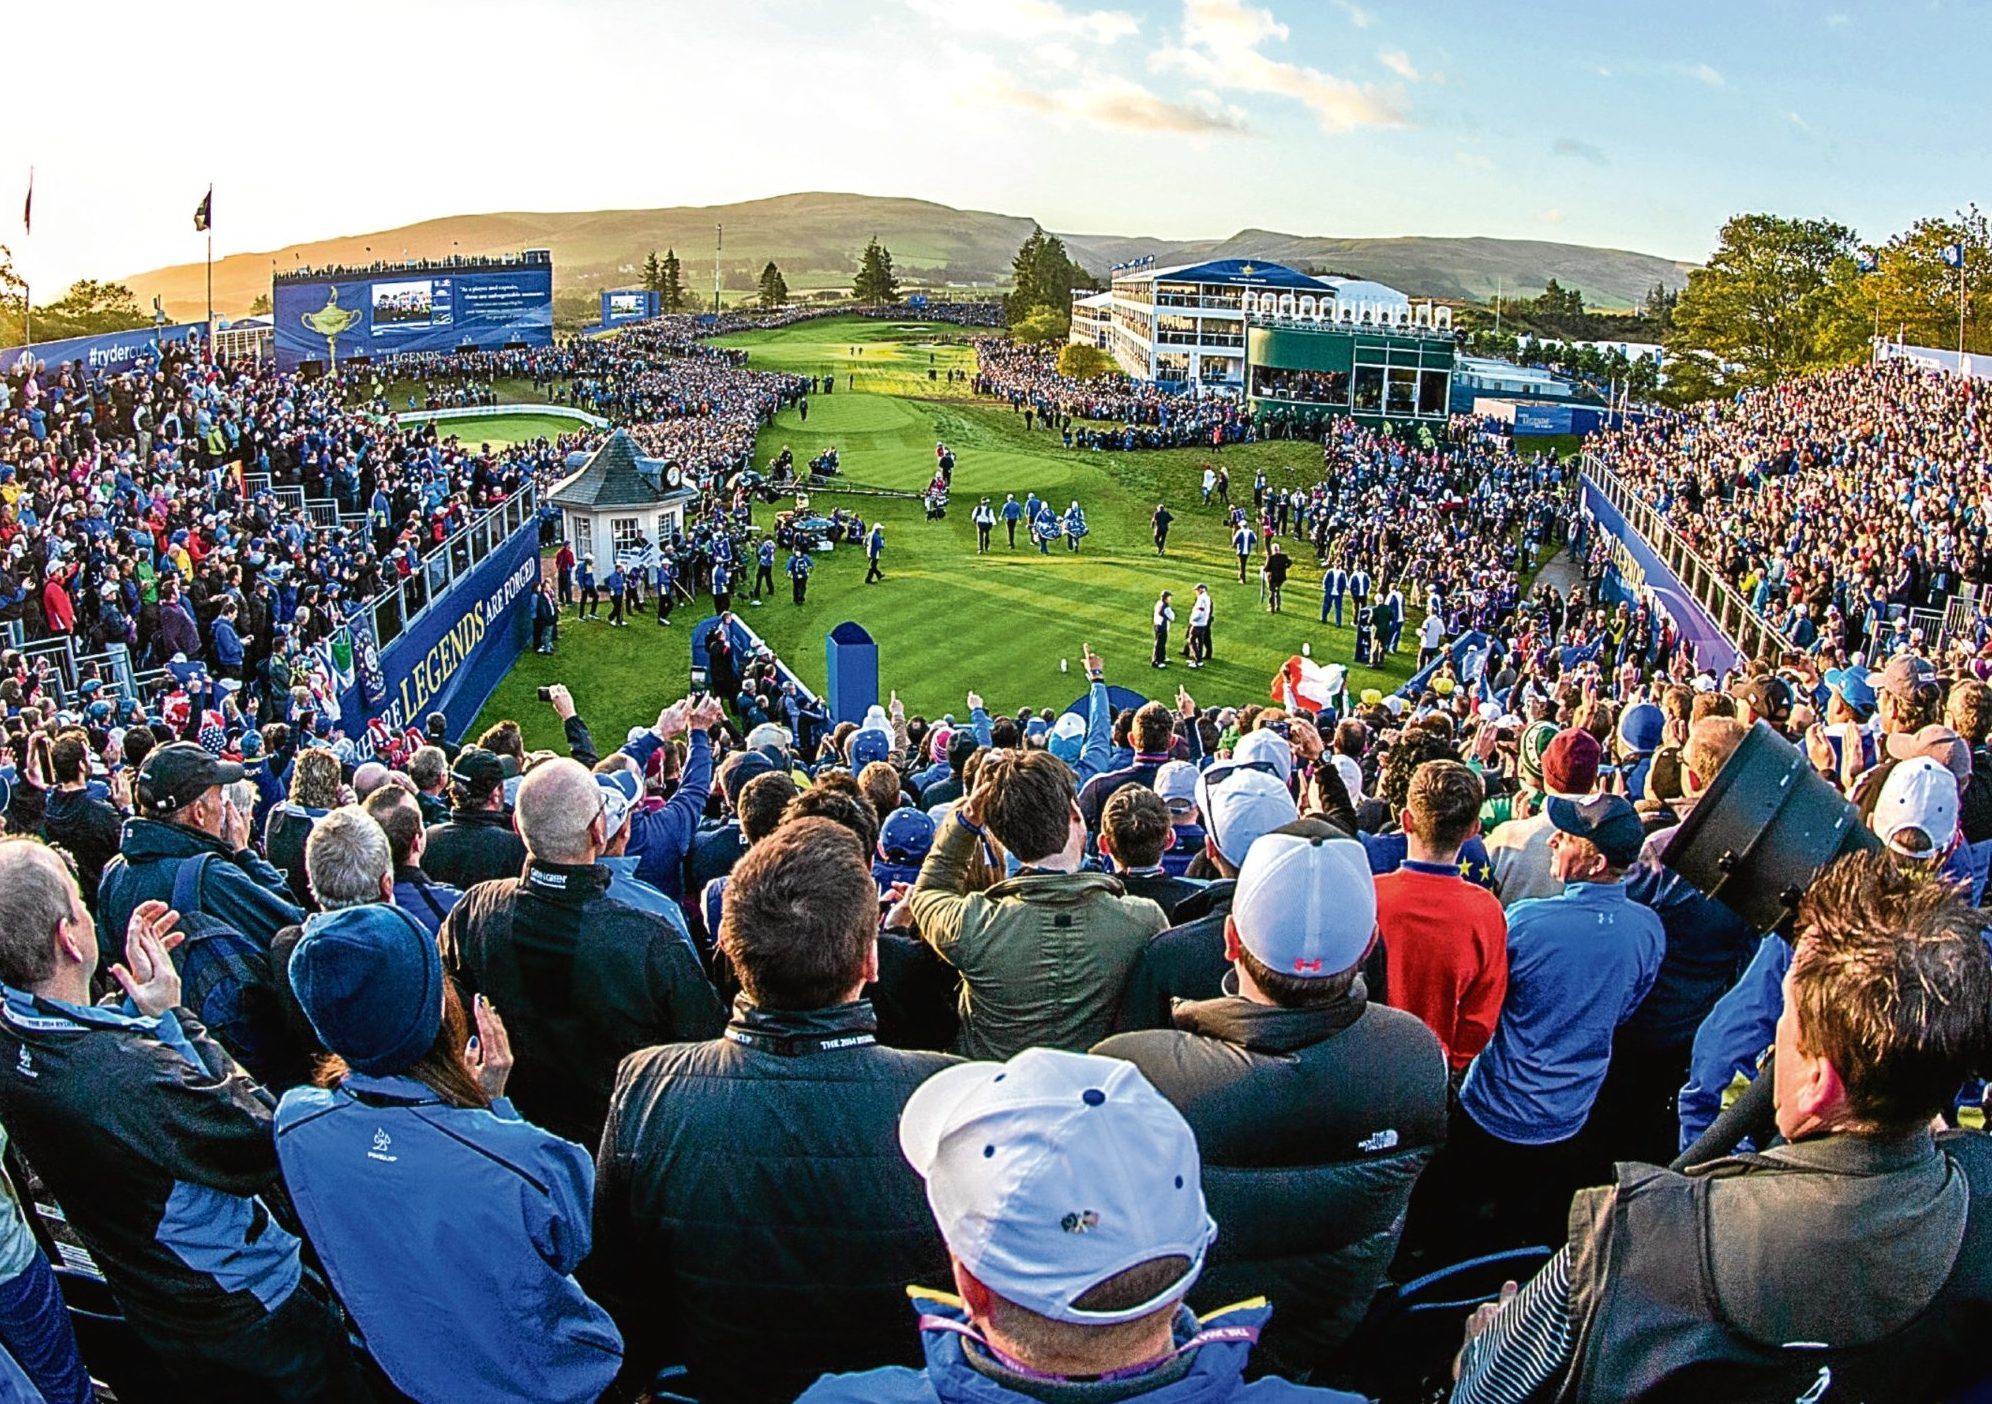 Golf fans at the 2014 Ryder Cup at Gleneagles.